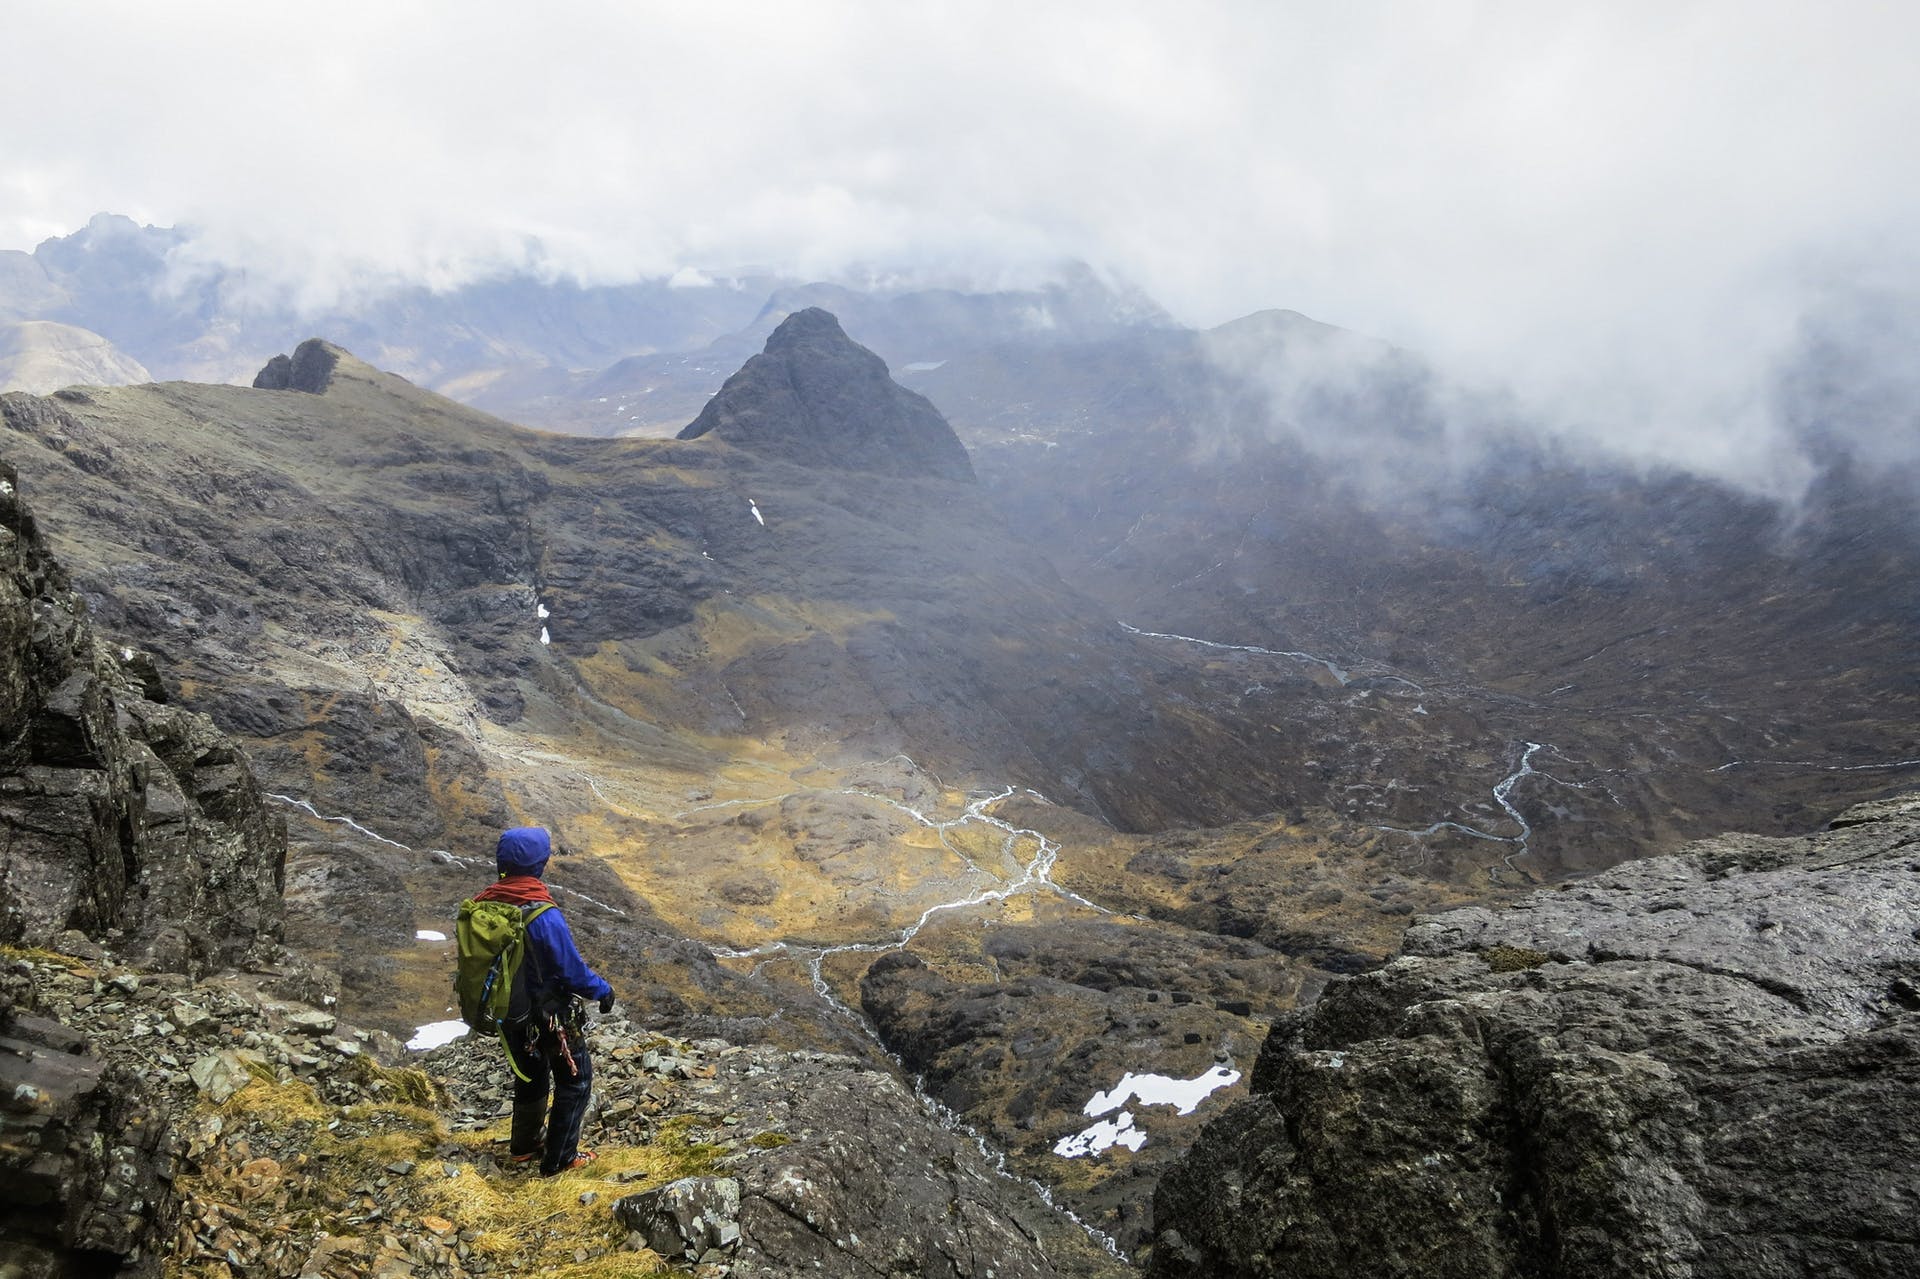 Views across the Cuillin Mountains